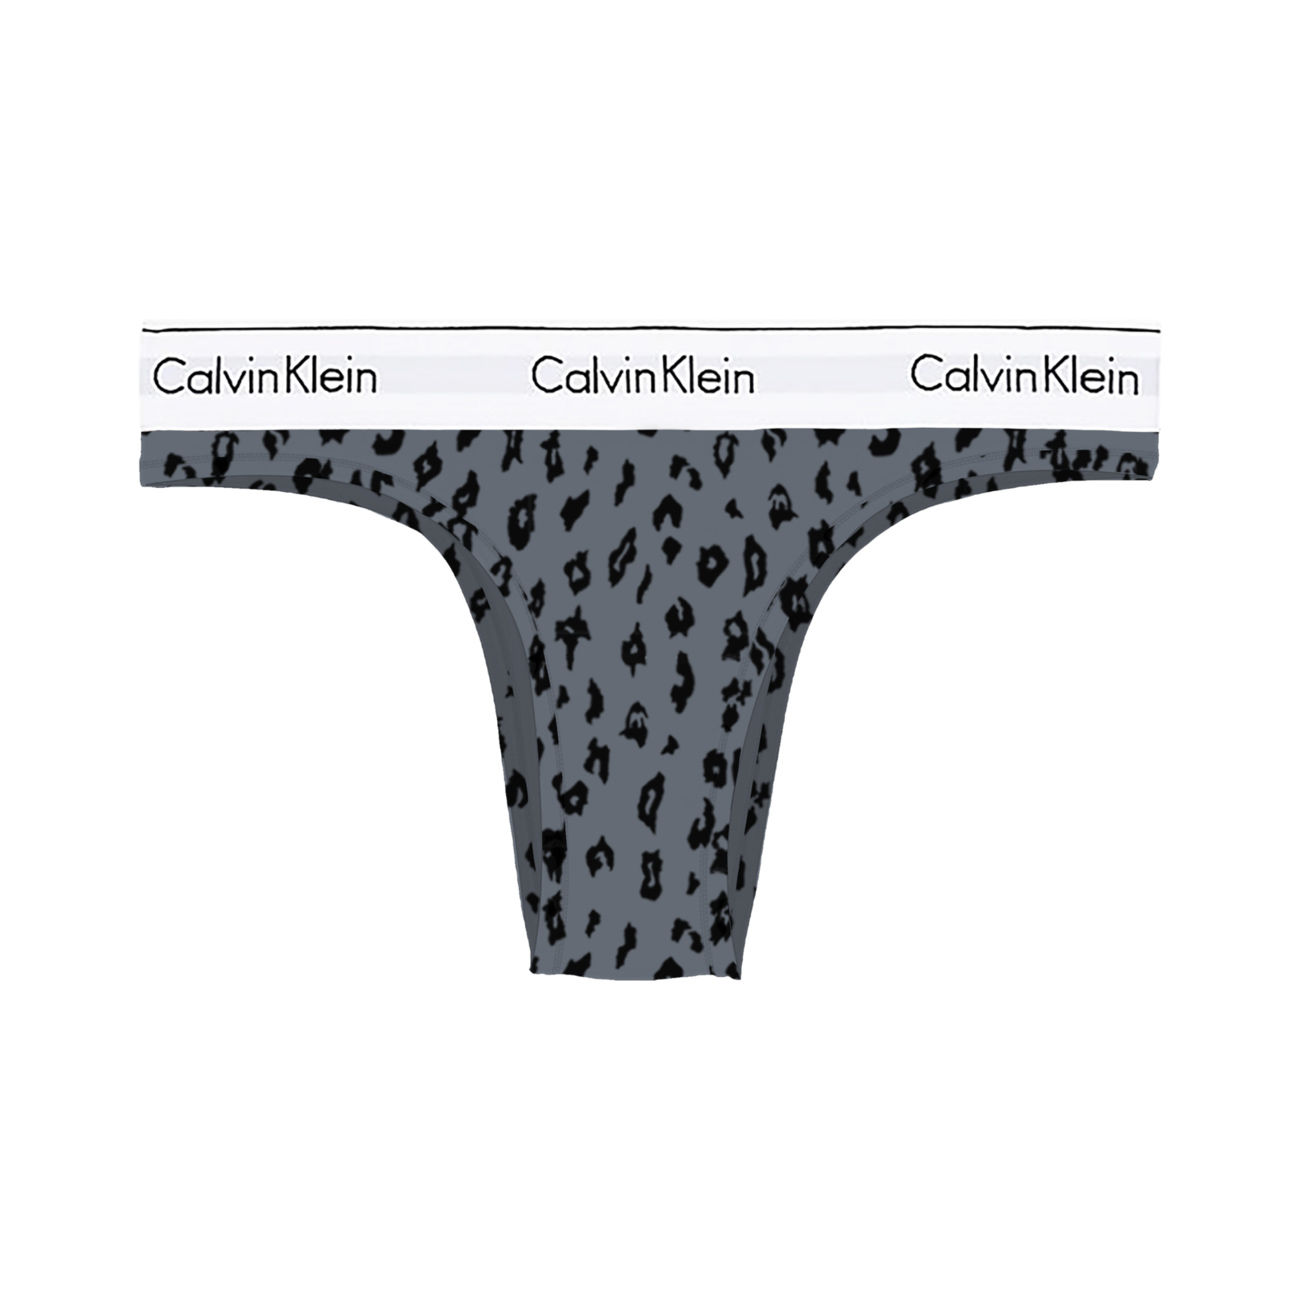 SPOTTED CLASSIC BRIEFS Woman Pewter